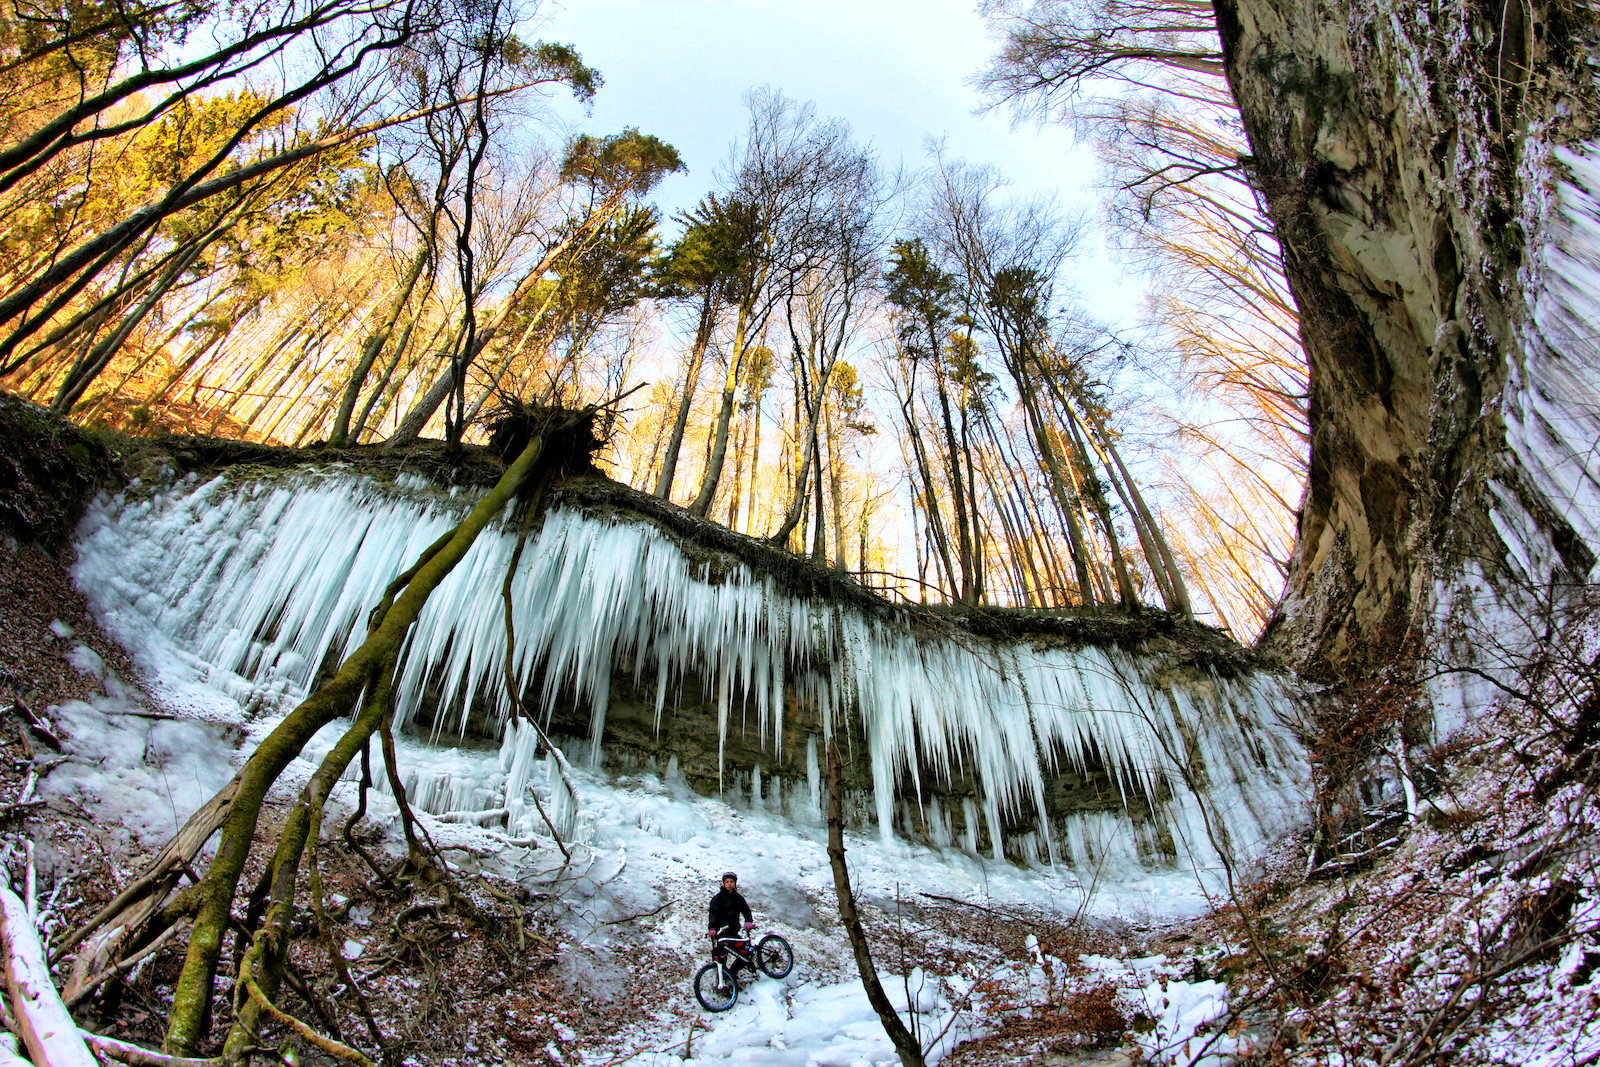 Impressive Icicles near one of my favourites Trails!